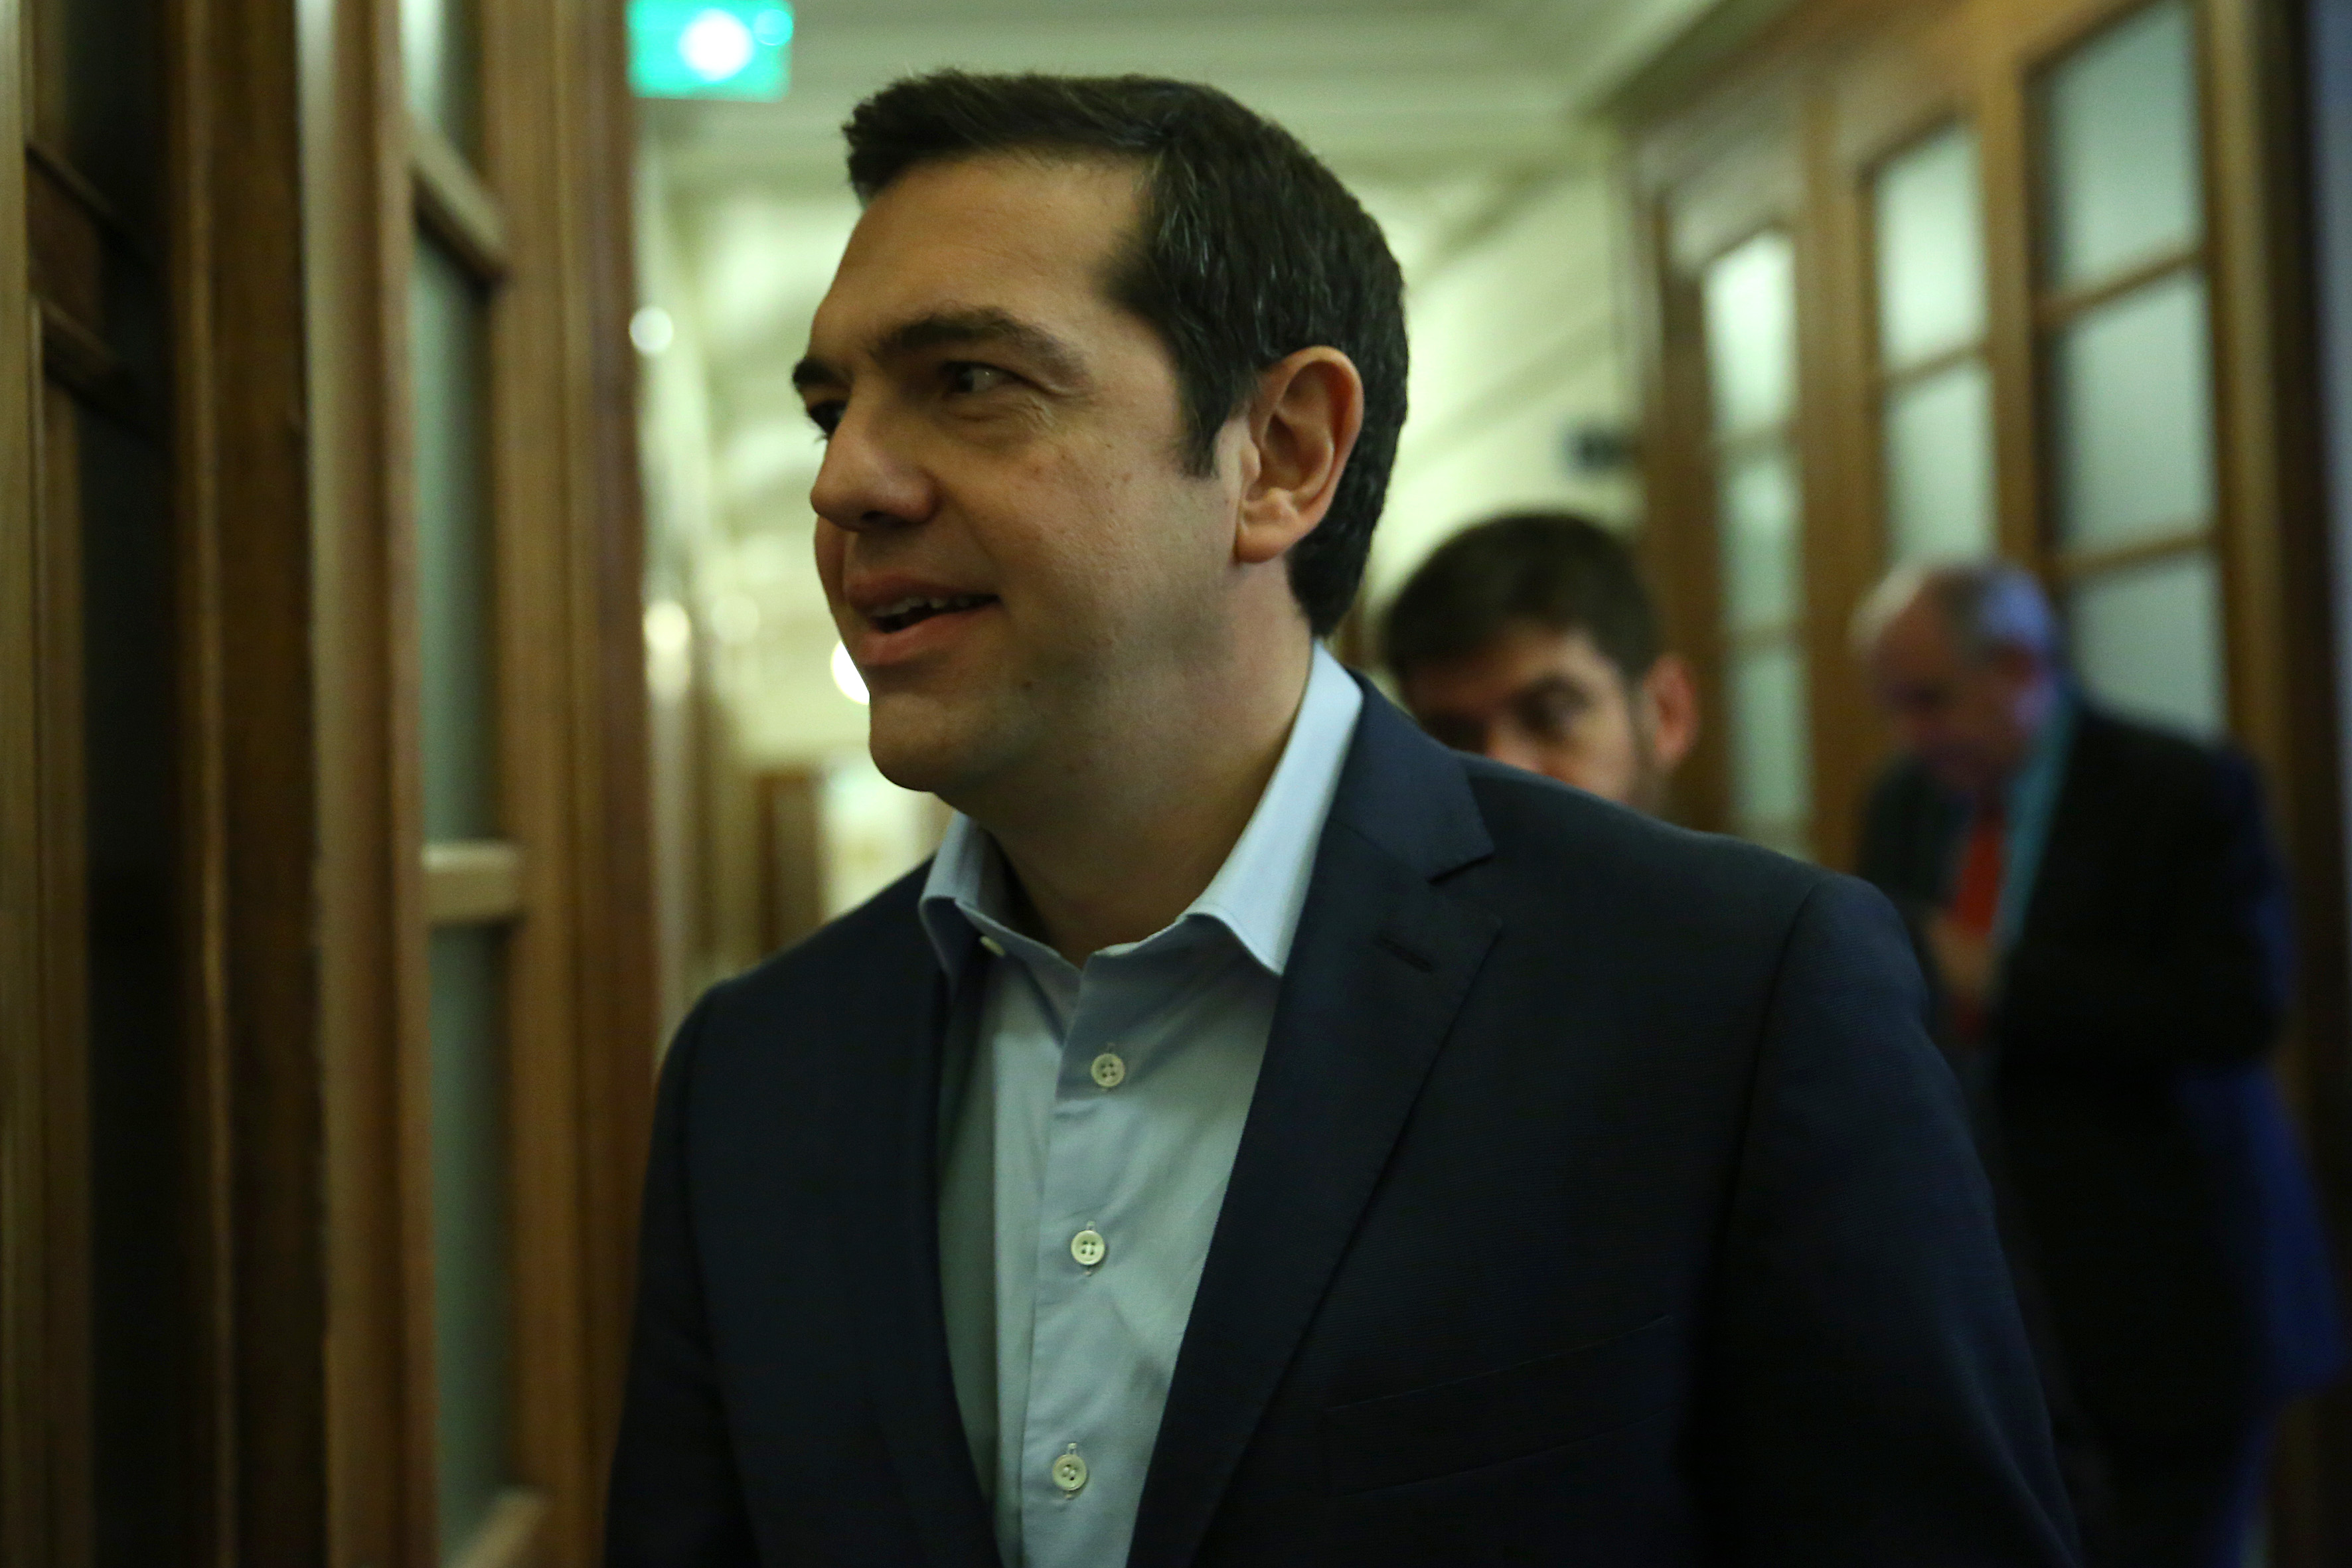 Tsipras rallies troops after plunge in polls